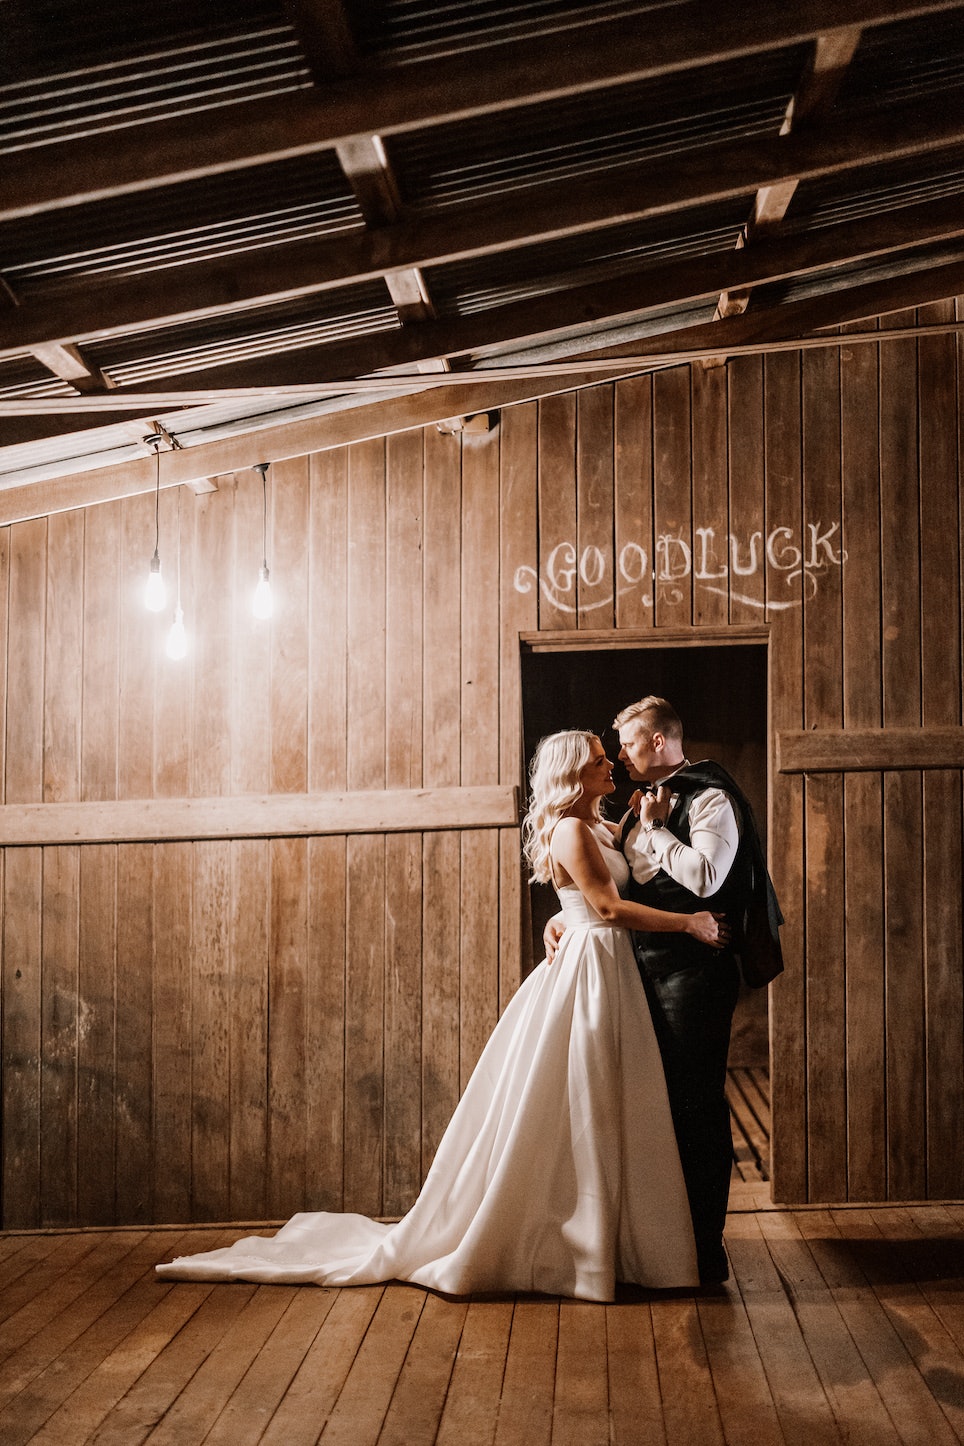 Bride and groom in stables